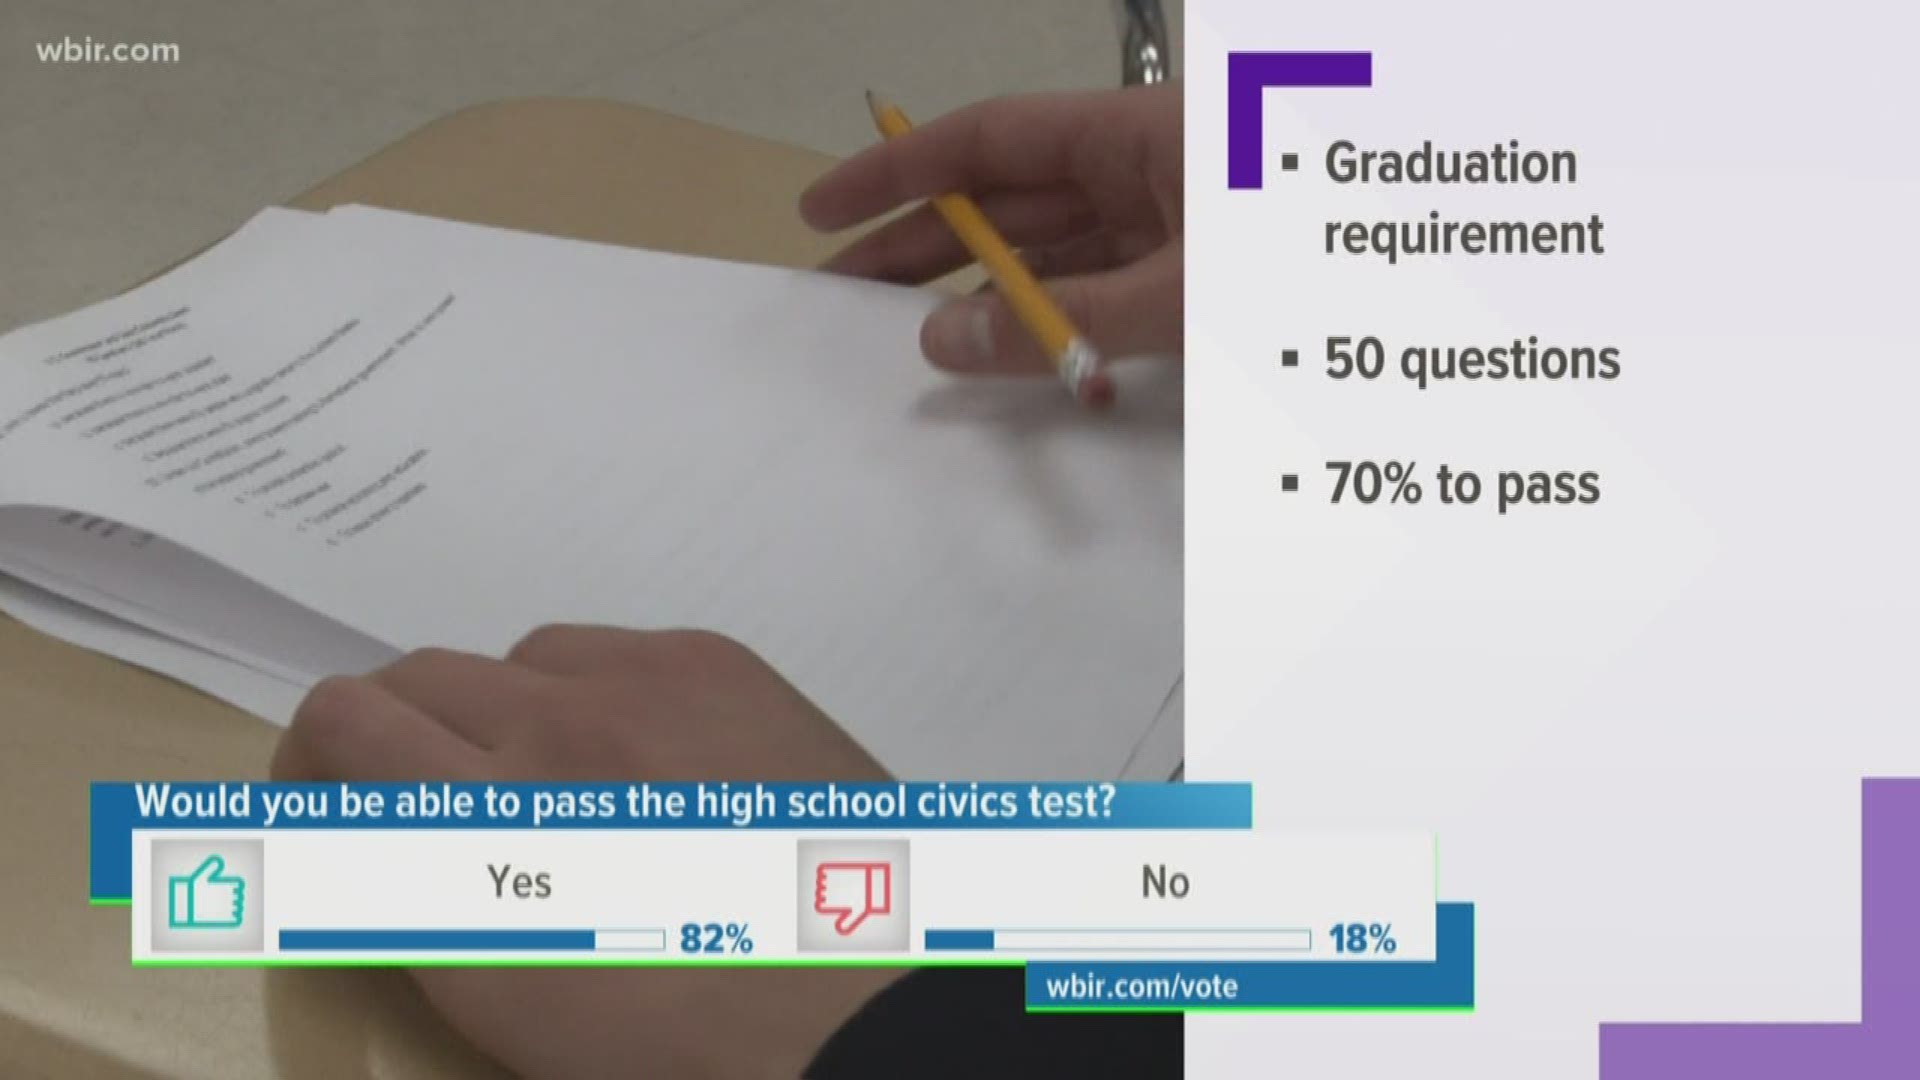 A Tennessee state law that went into effect in 2017 makes a civics test a requirement to graduate.